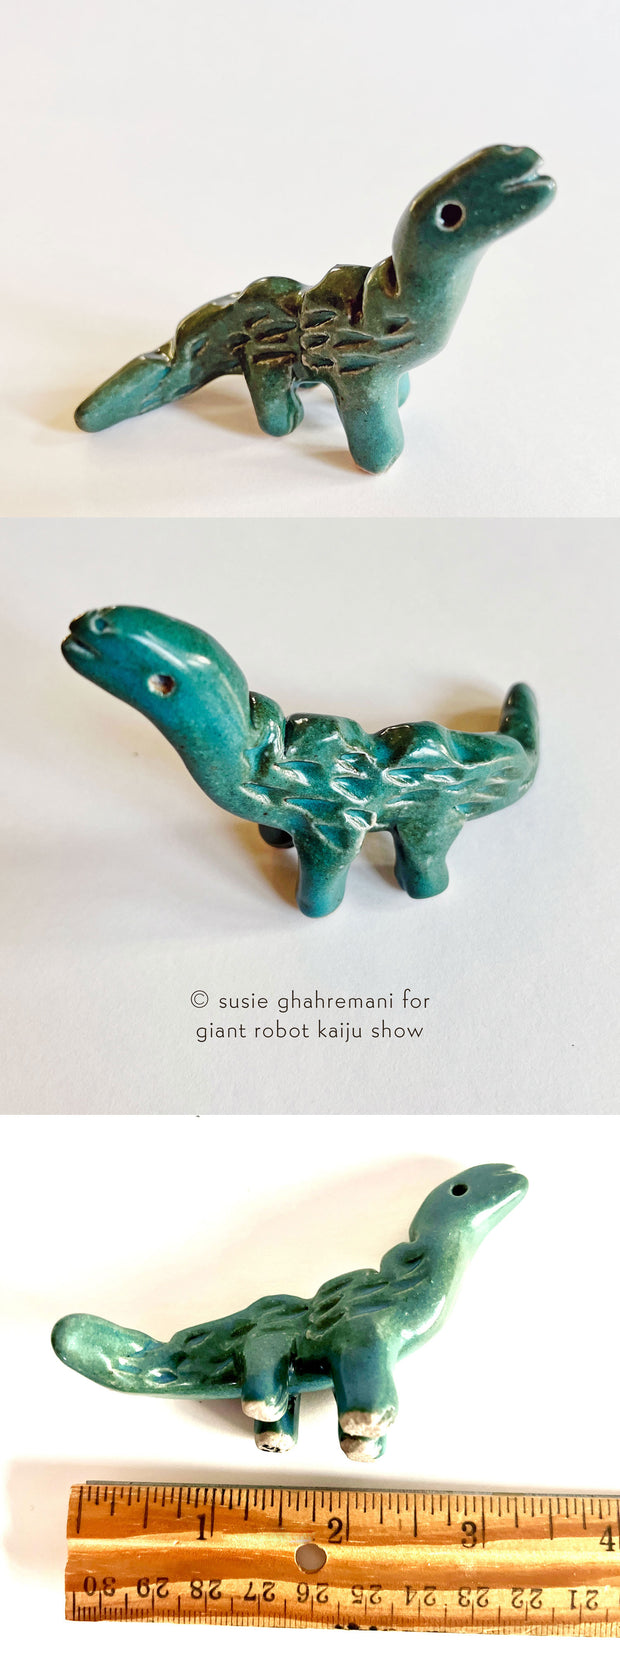 Small ceramic sculpture of a bluish green dinosaur with a long neck and textured ridges on its back.